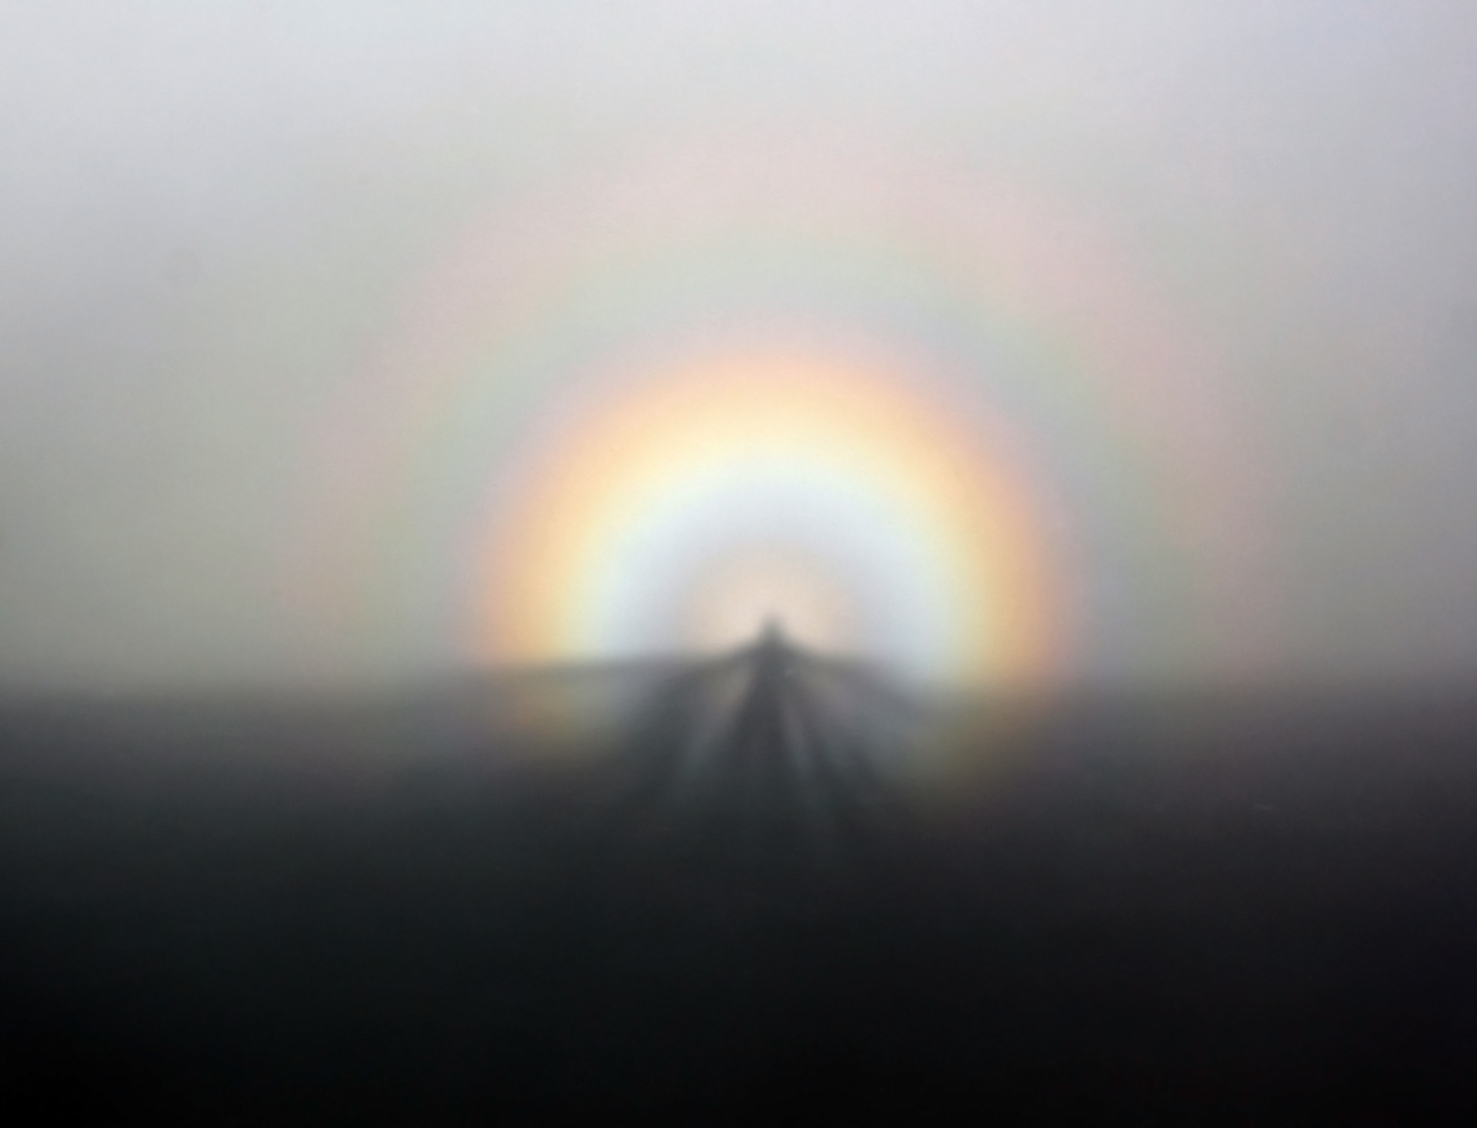 File:Solar glory and Spectre of the Brocken from GGB on 07-05-2011.jpg - Wikimedia Commons